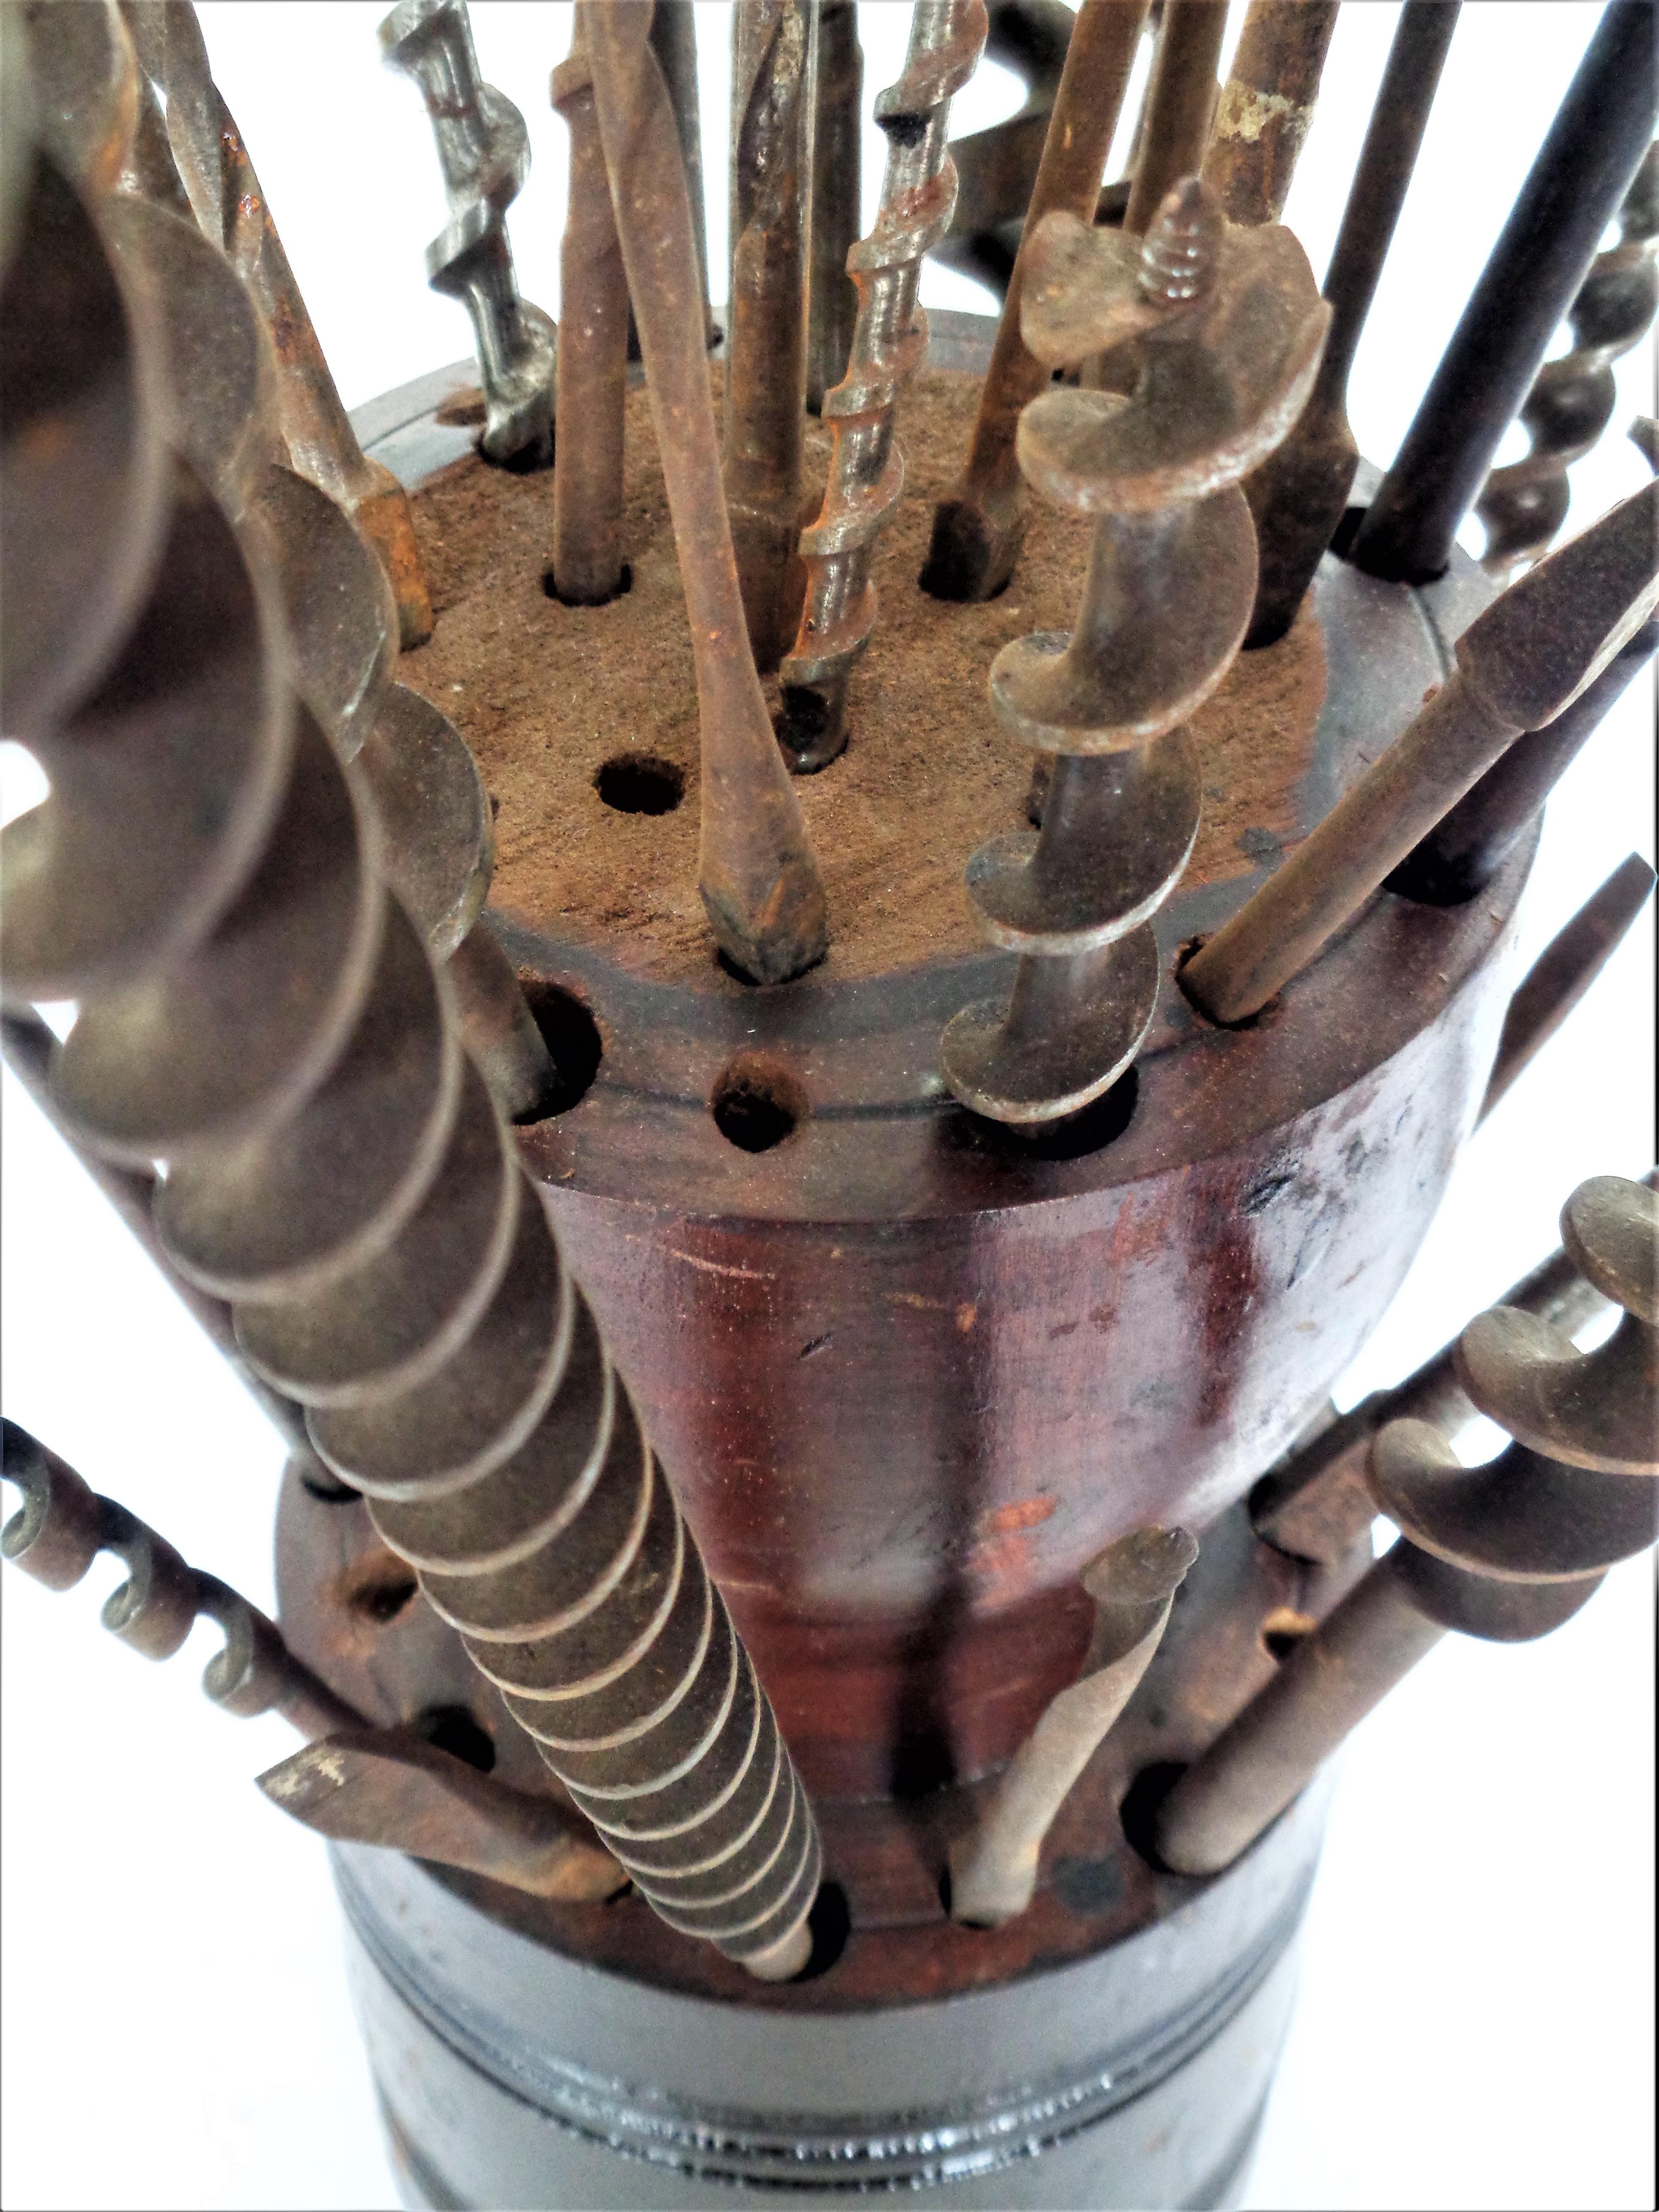 20th Century Antique Drill Bit Holder & Drill Bits, As Found Industrial Sculpture For Sale